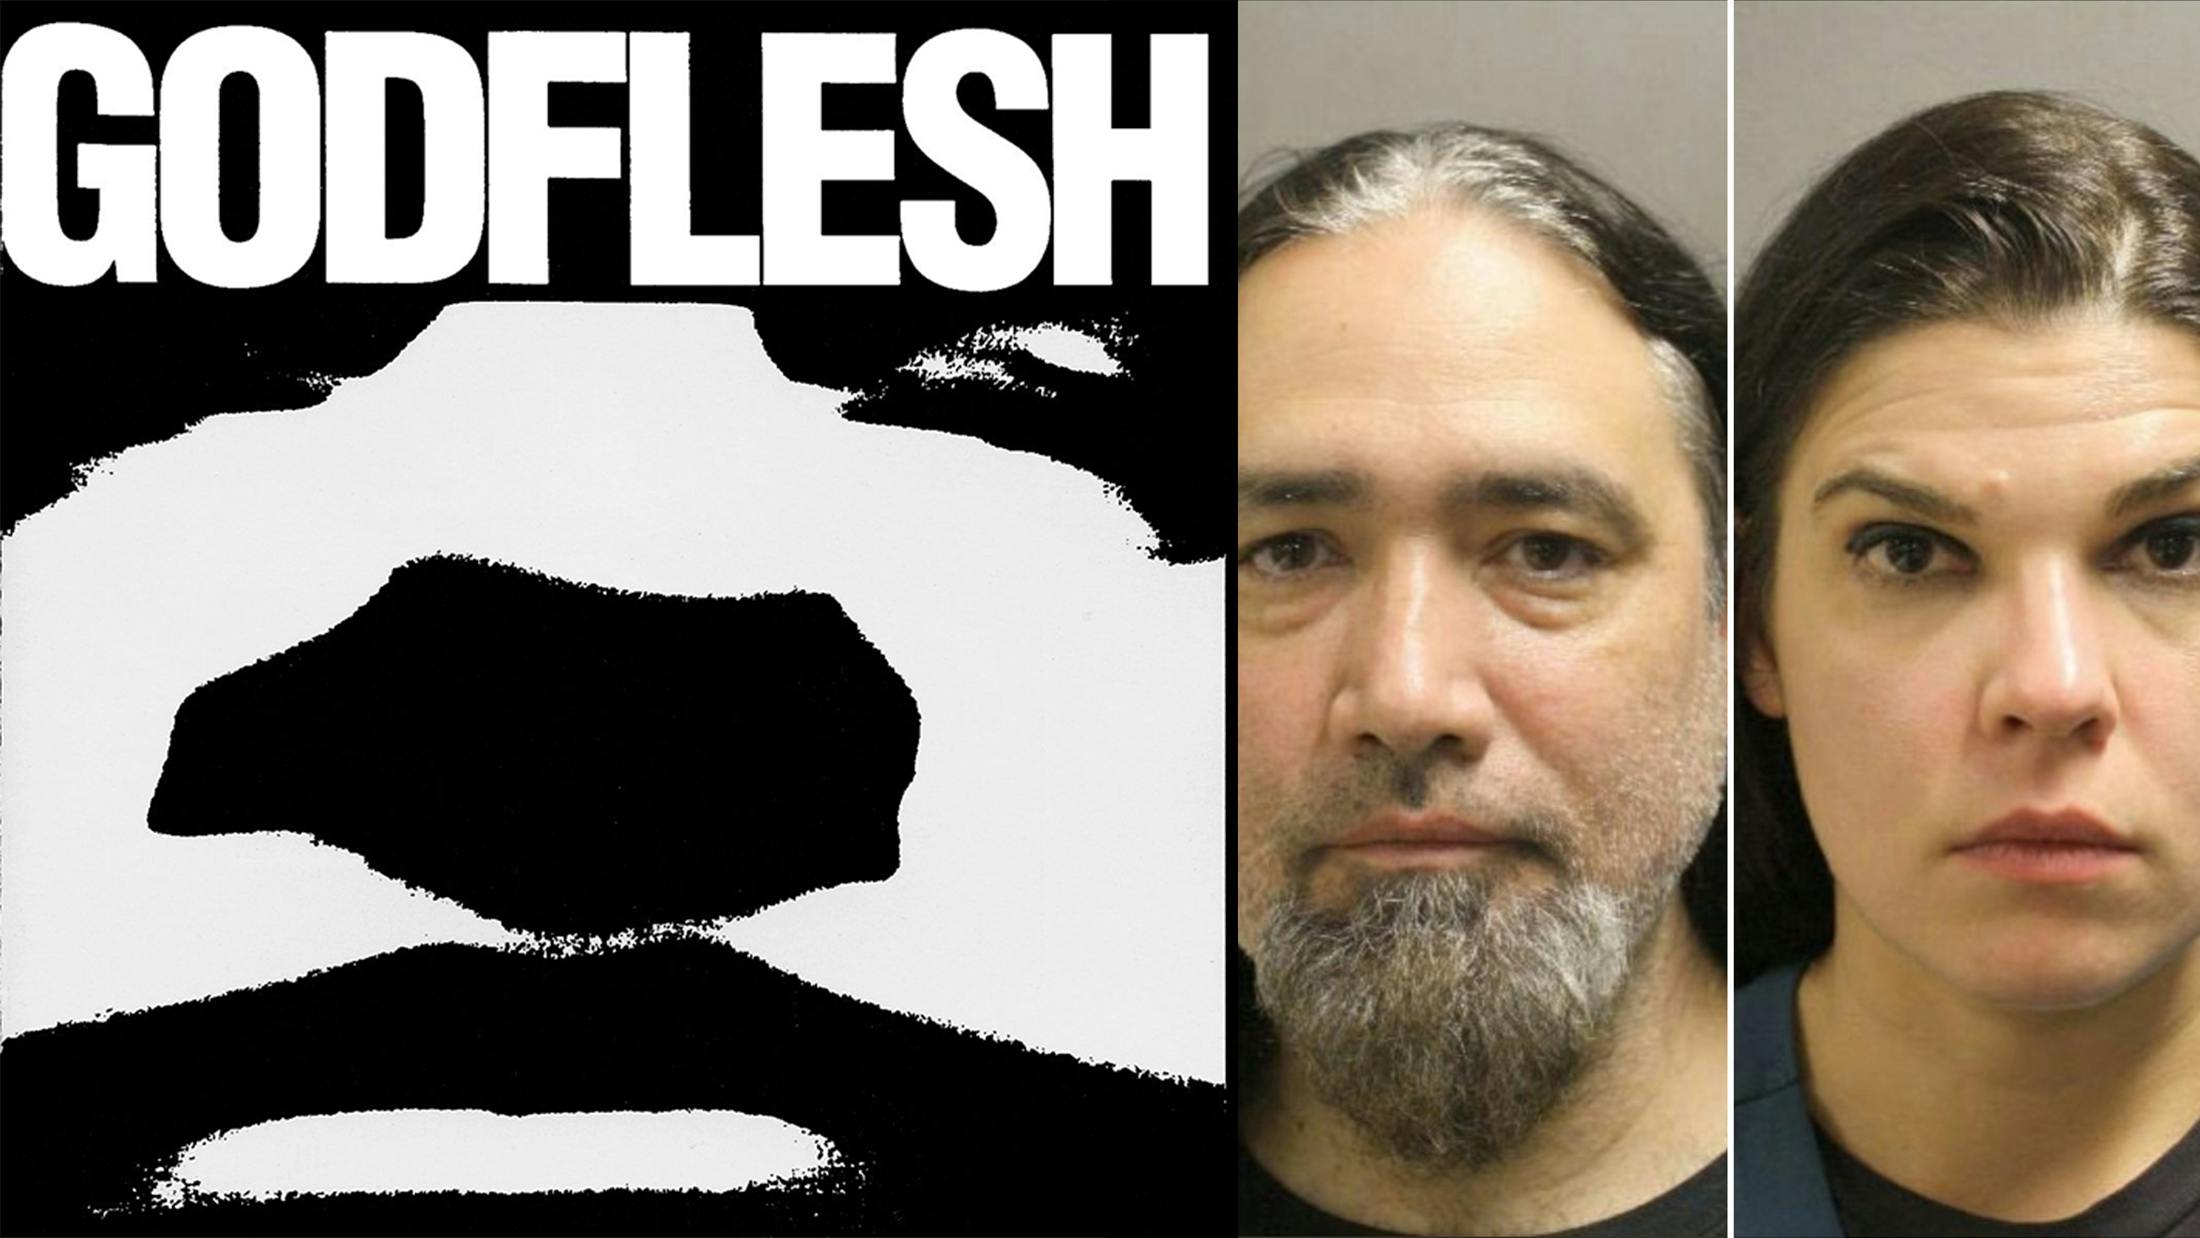 Texas Couple Charged With Child Endangerment After Abandoning Child To Attend Godflesh Show